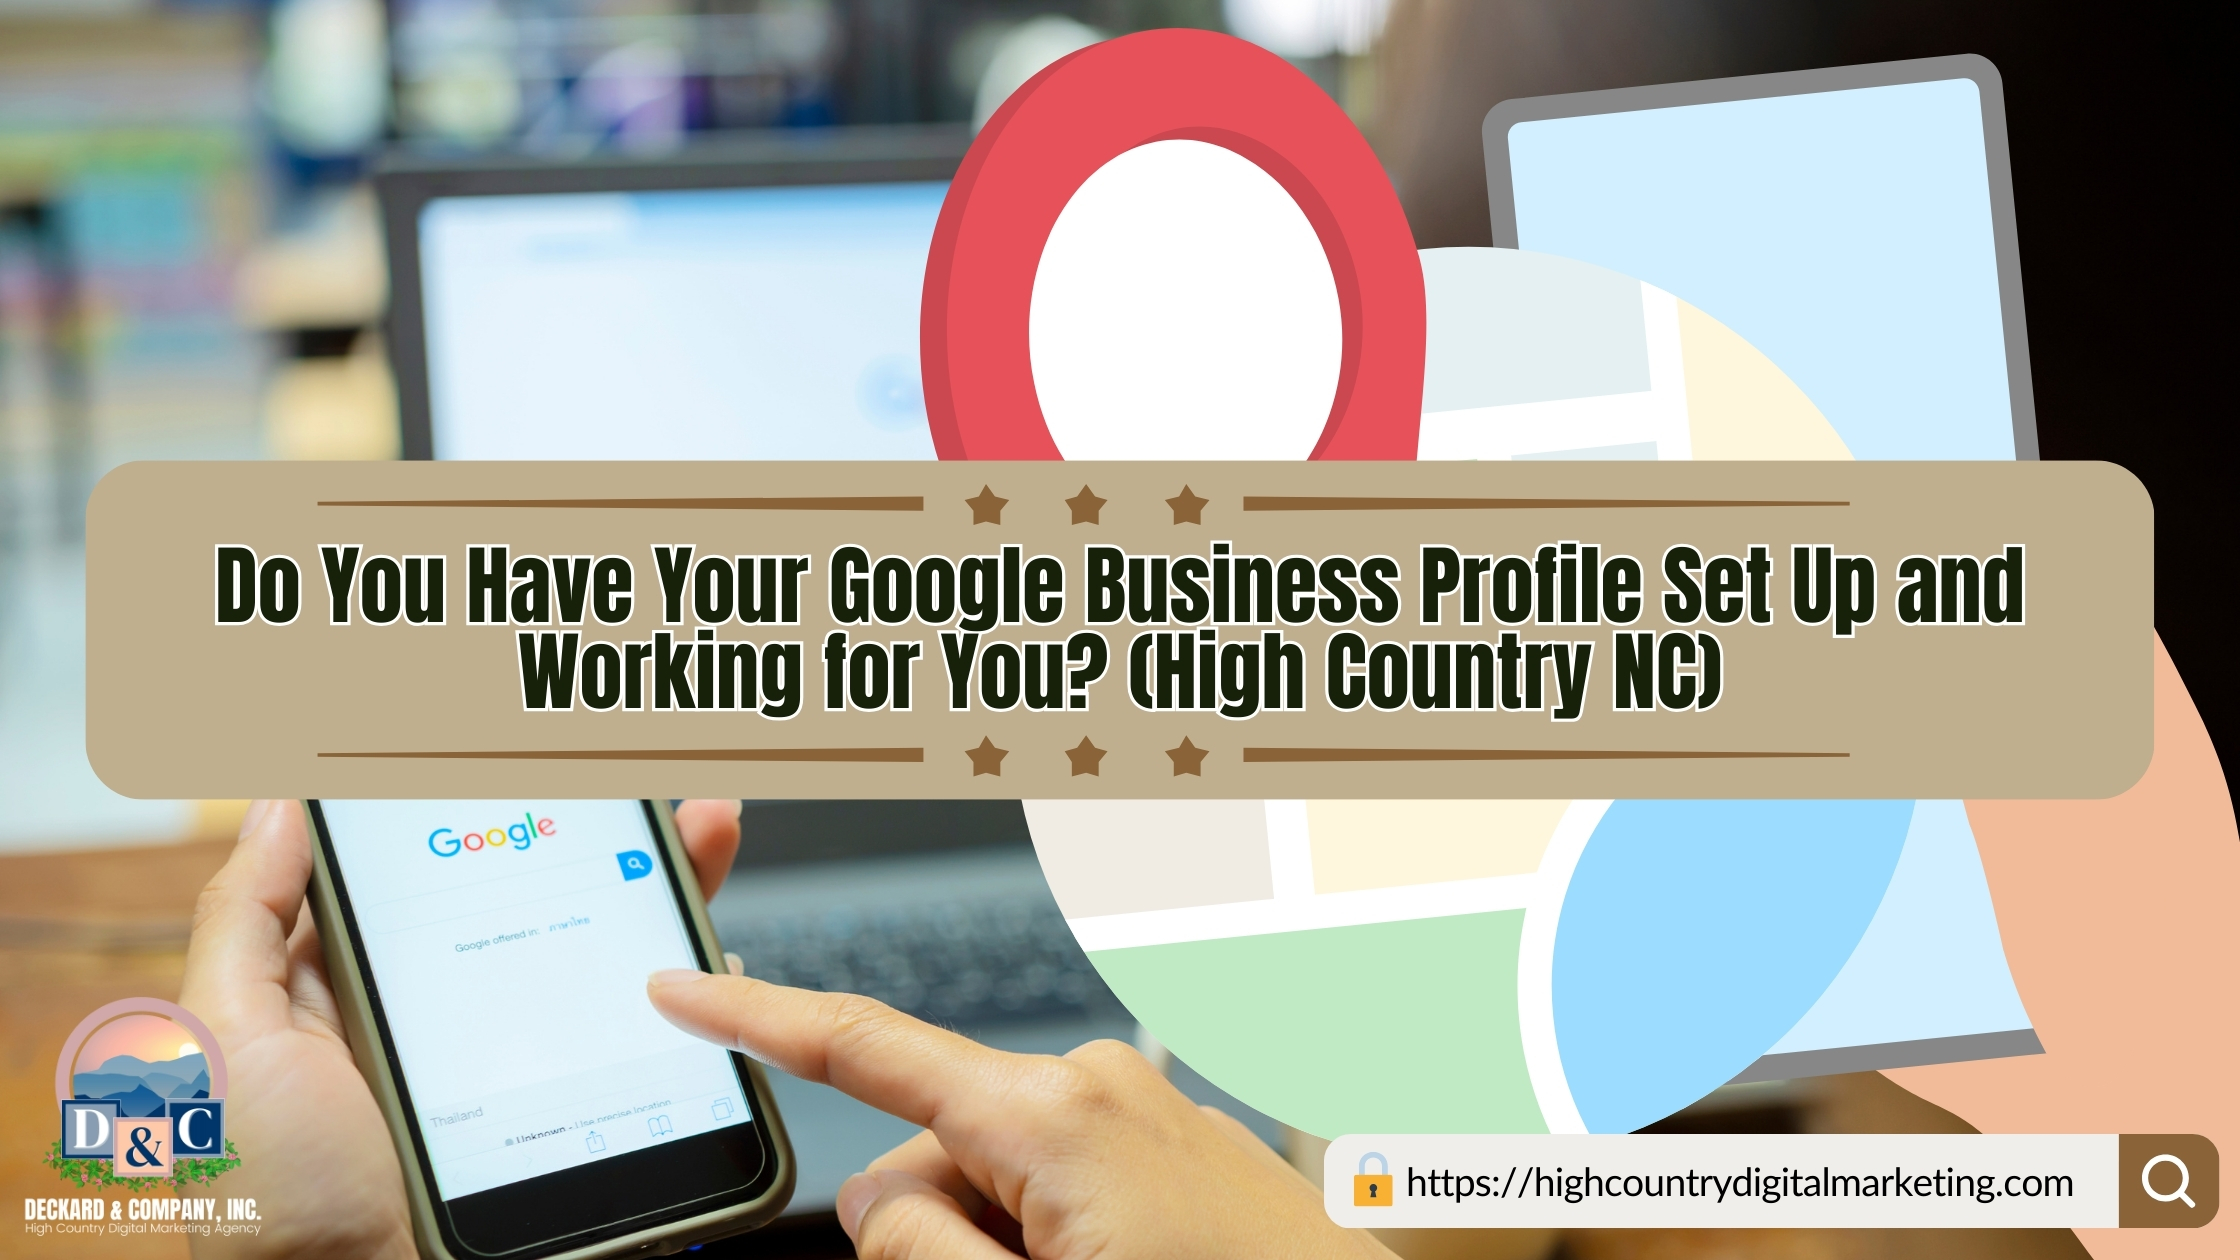 Do You Have Your Google Business Profile Set Up and Working for You? (High Country NC)